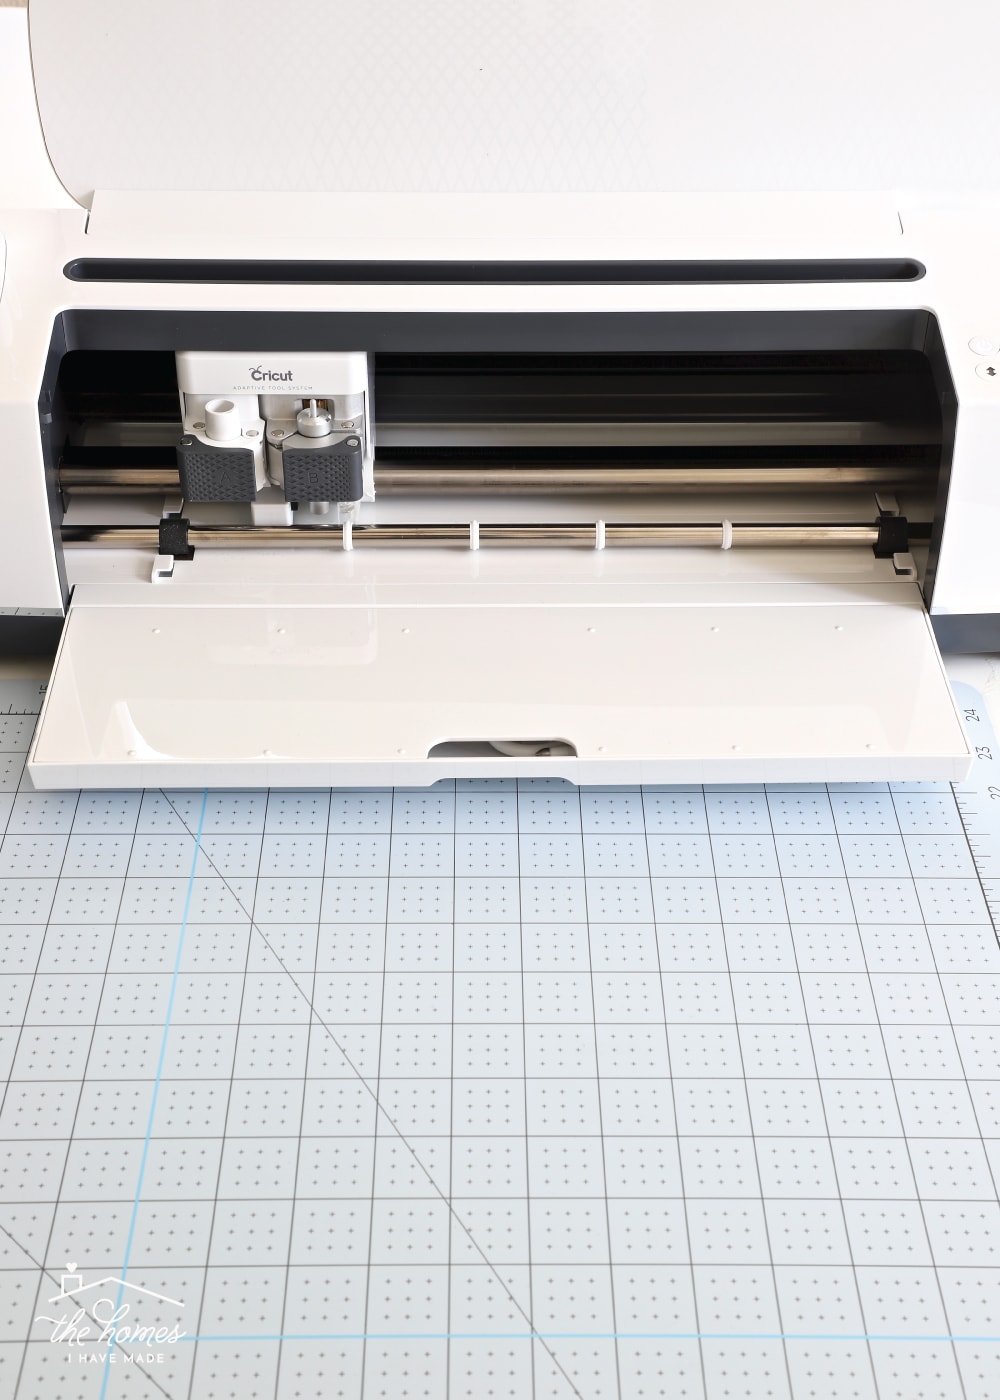 Do you have a Cricut Explore and you're debating an upgrade to the Cricut Maker? Learn everything you need to know about Cricut's newest machine!